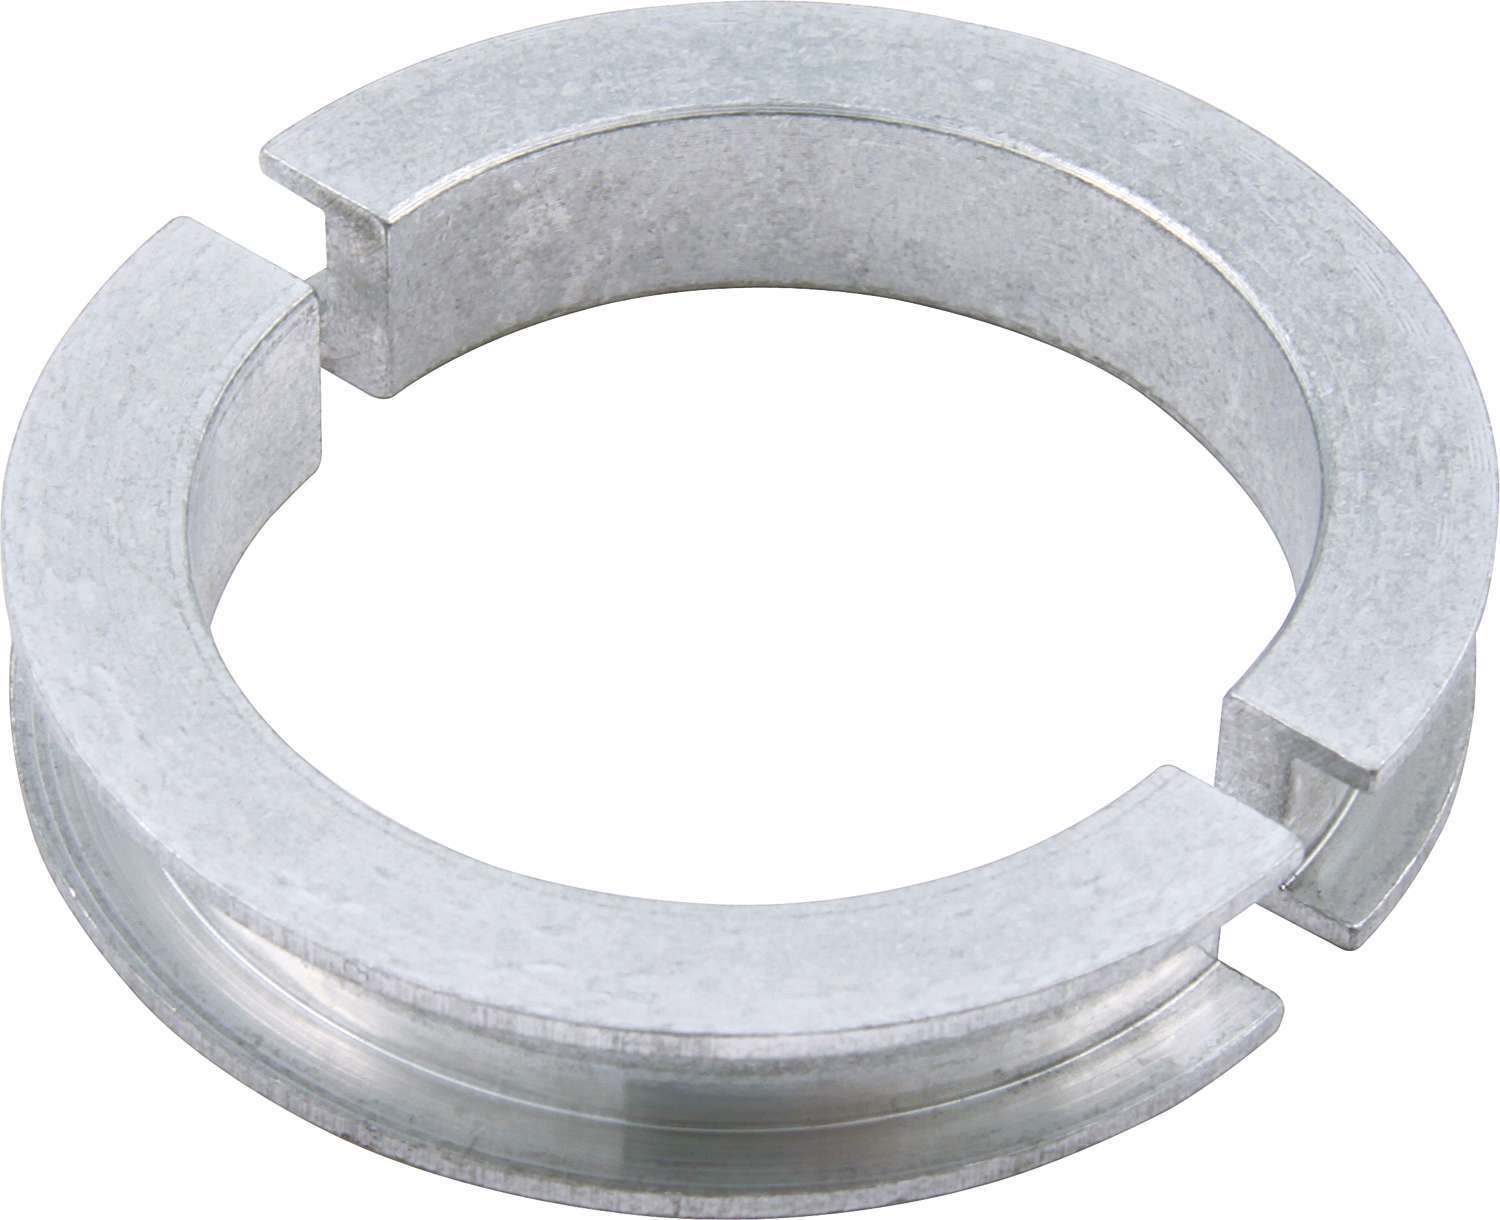 Roll Bar Clamp Reducer 1-3/4 In  to 1-1/2 In  66-908